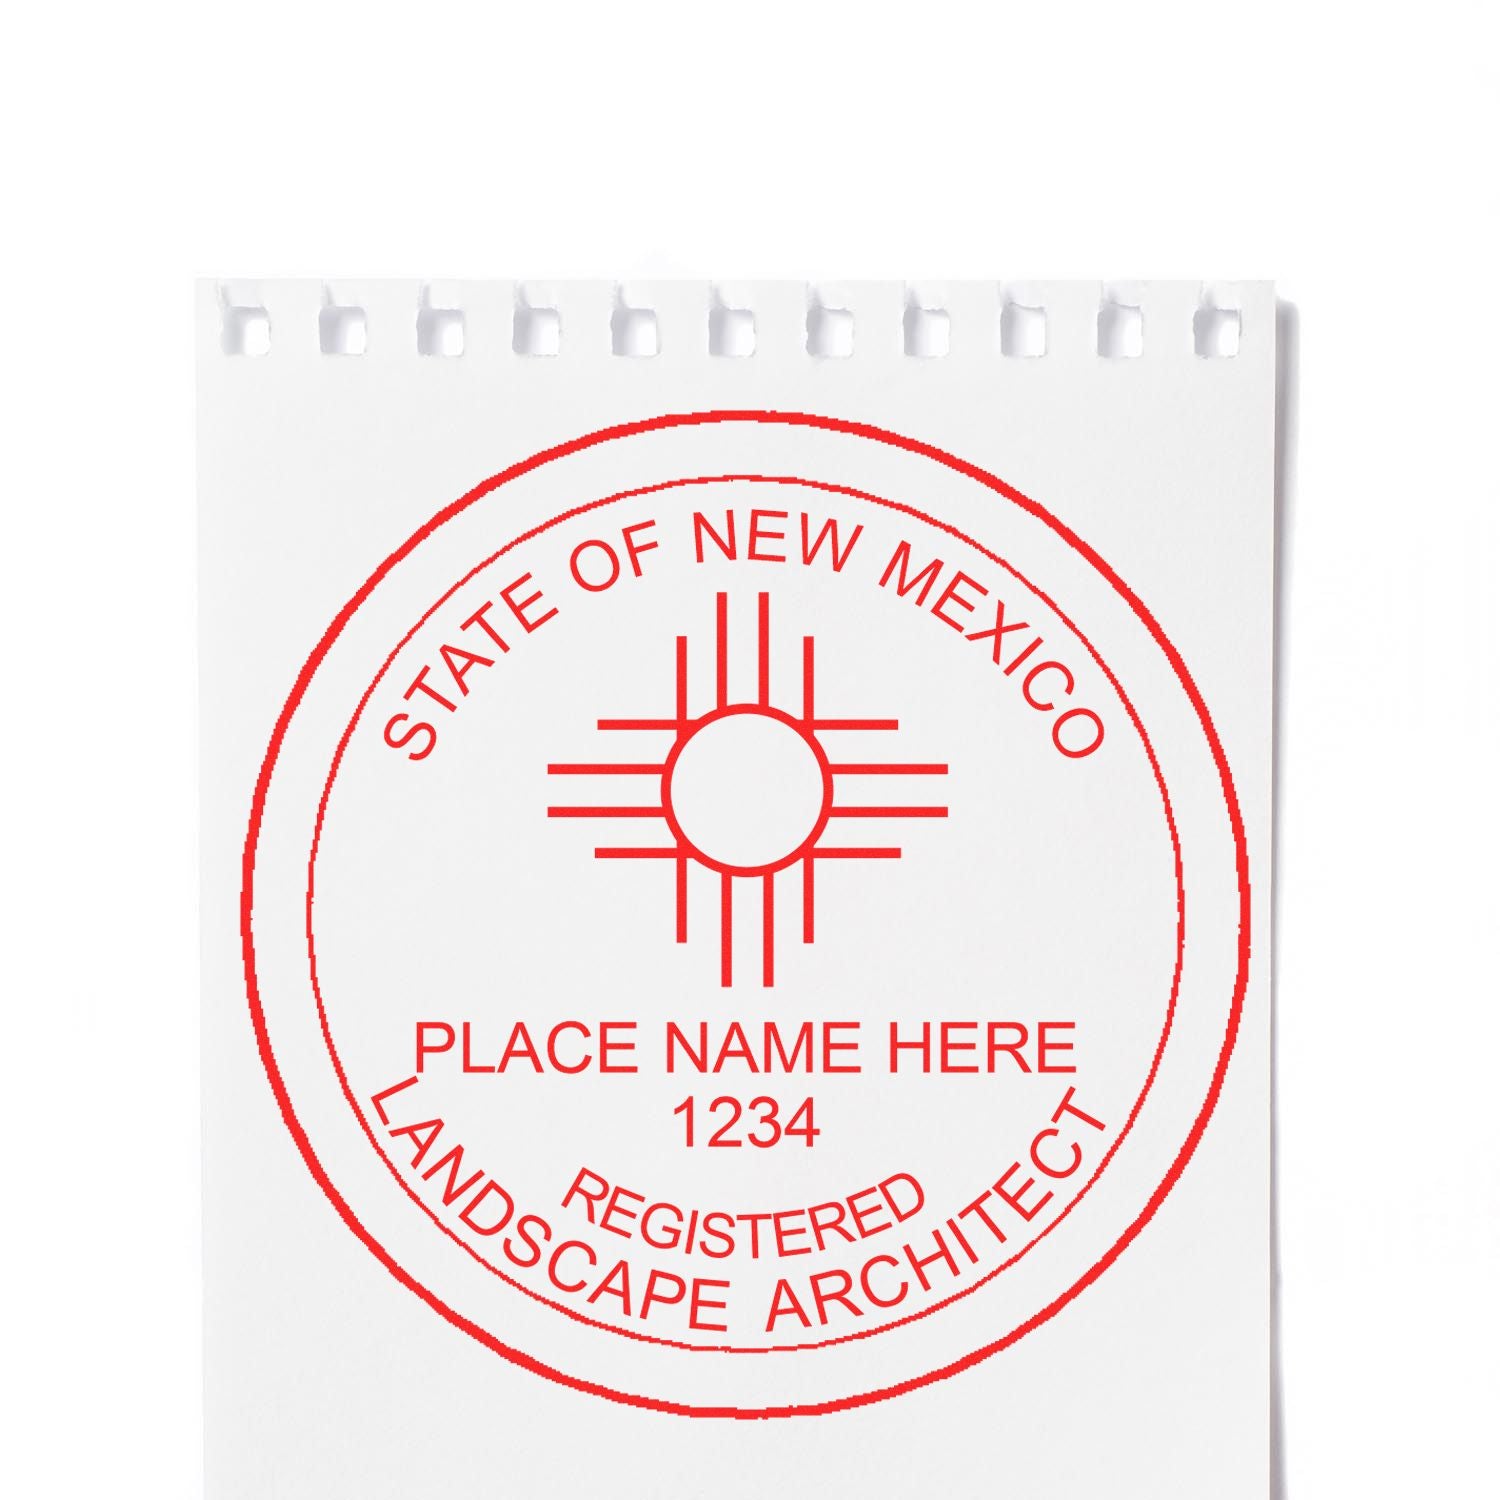 A photograph of the Digital New Mexico Landscape Architect Stamp stamp impression reveals a vivid, professional image of the on paper.